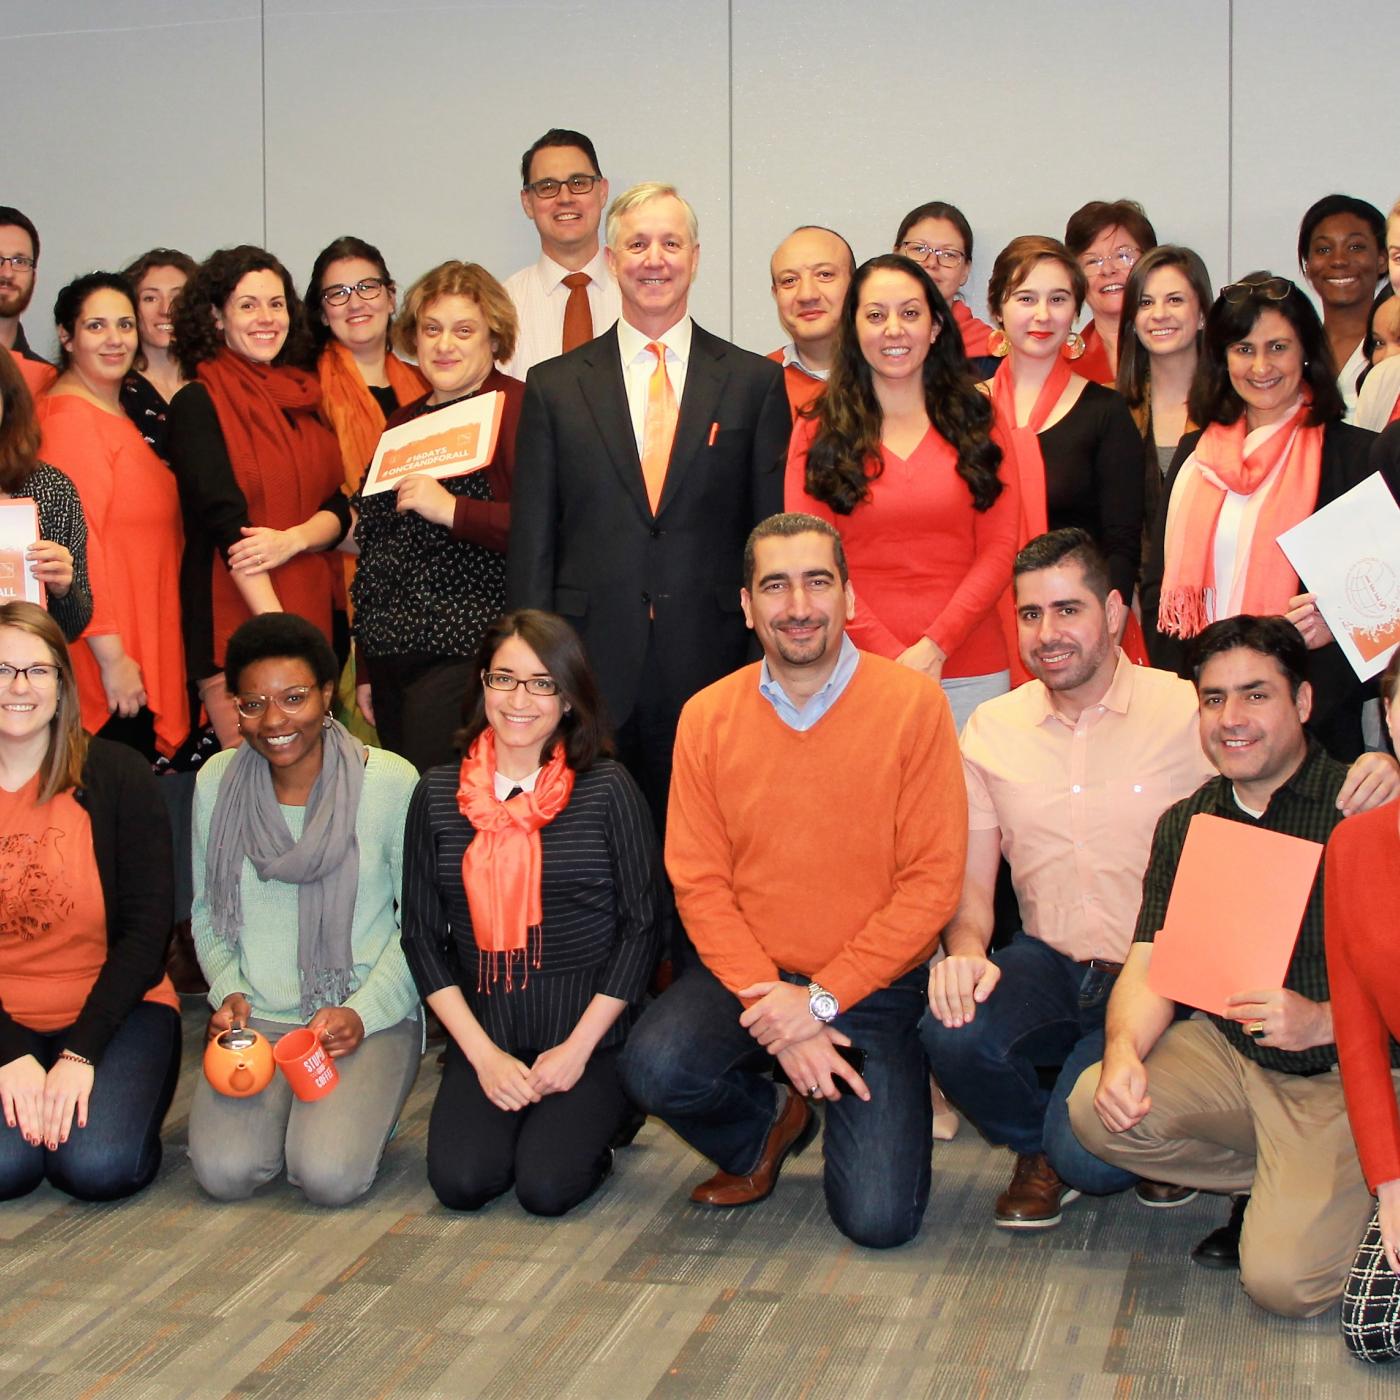 IFES HQ staff group photo in orange against violence against women. 